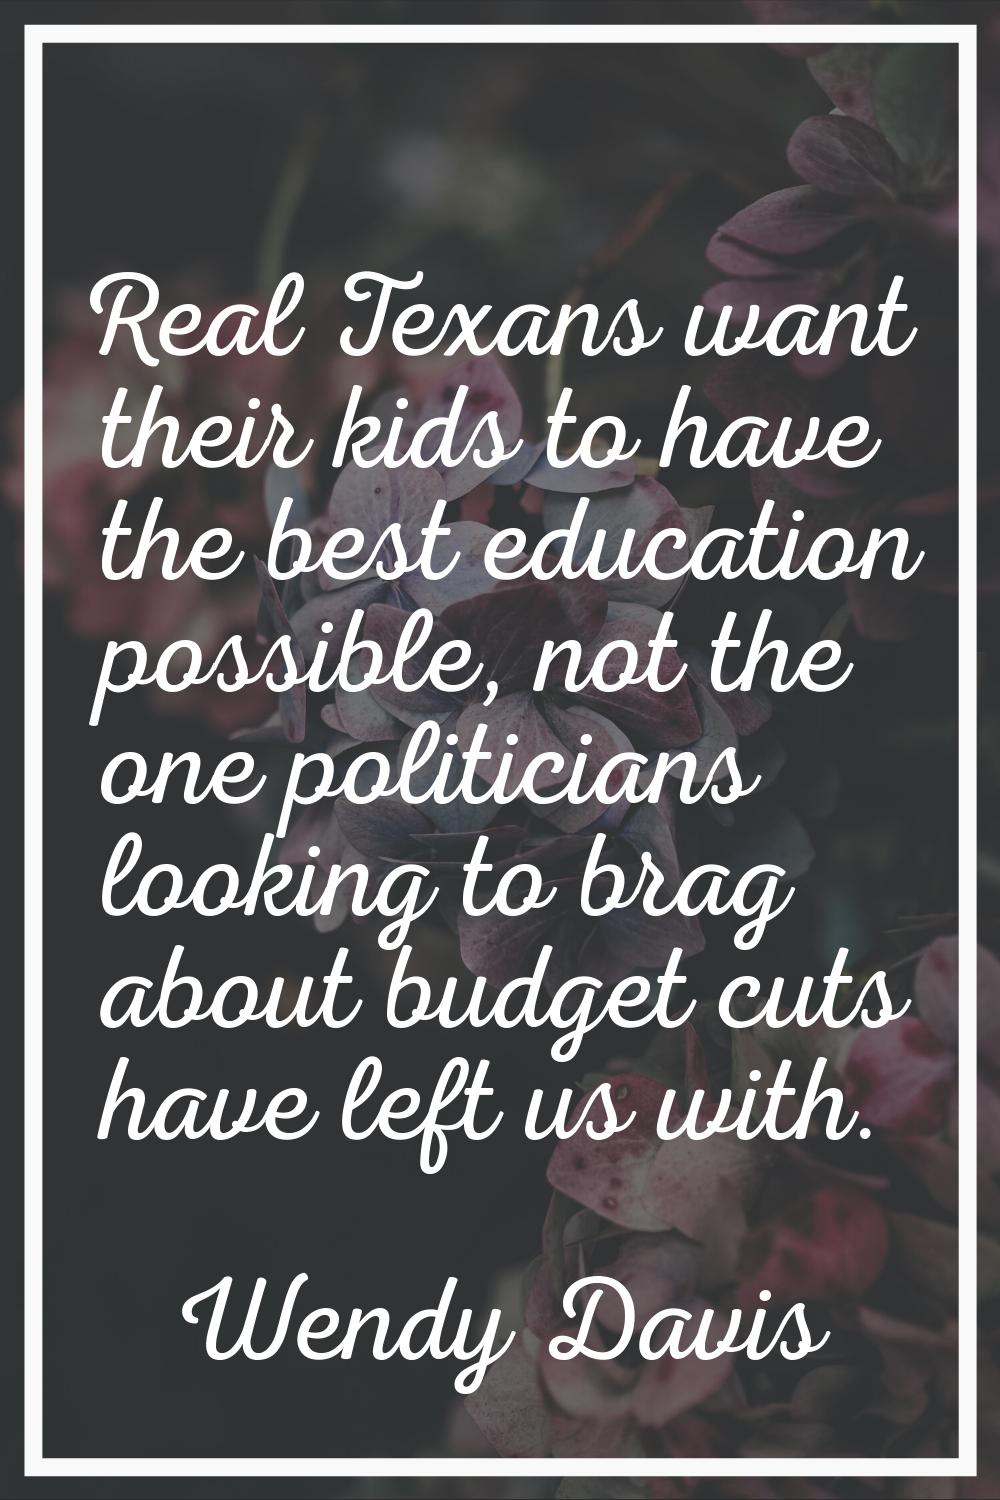 Real Texans want their kids to have the best education possible, not the one politicians looking to